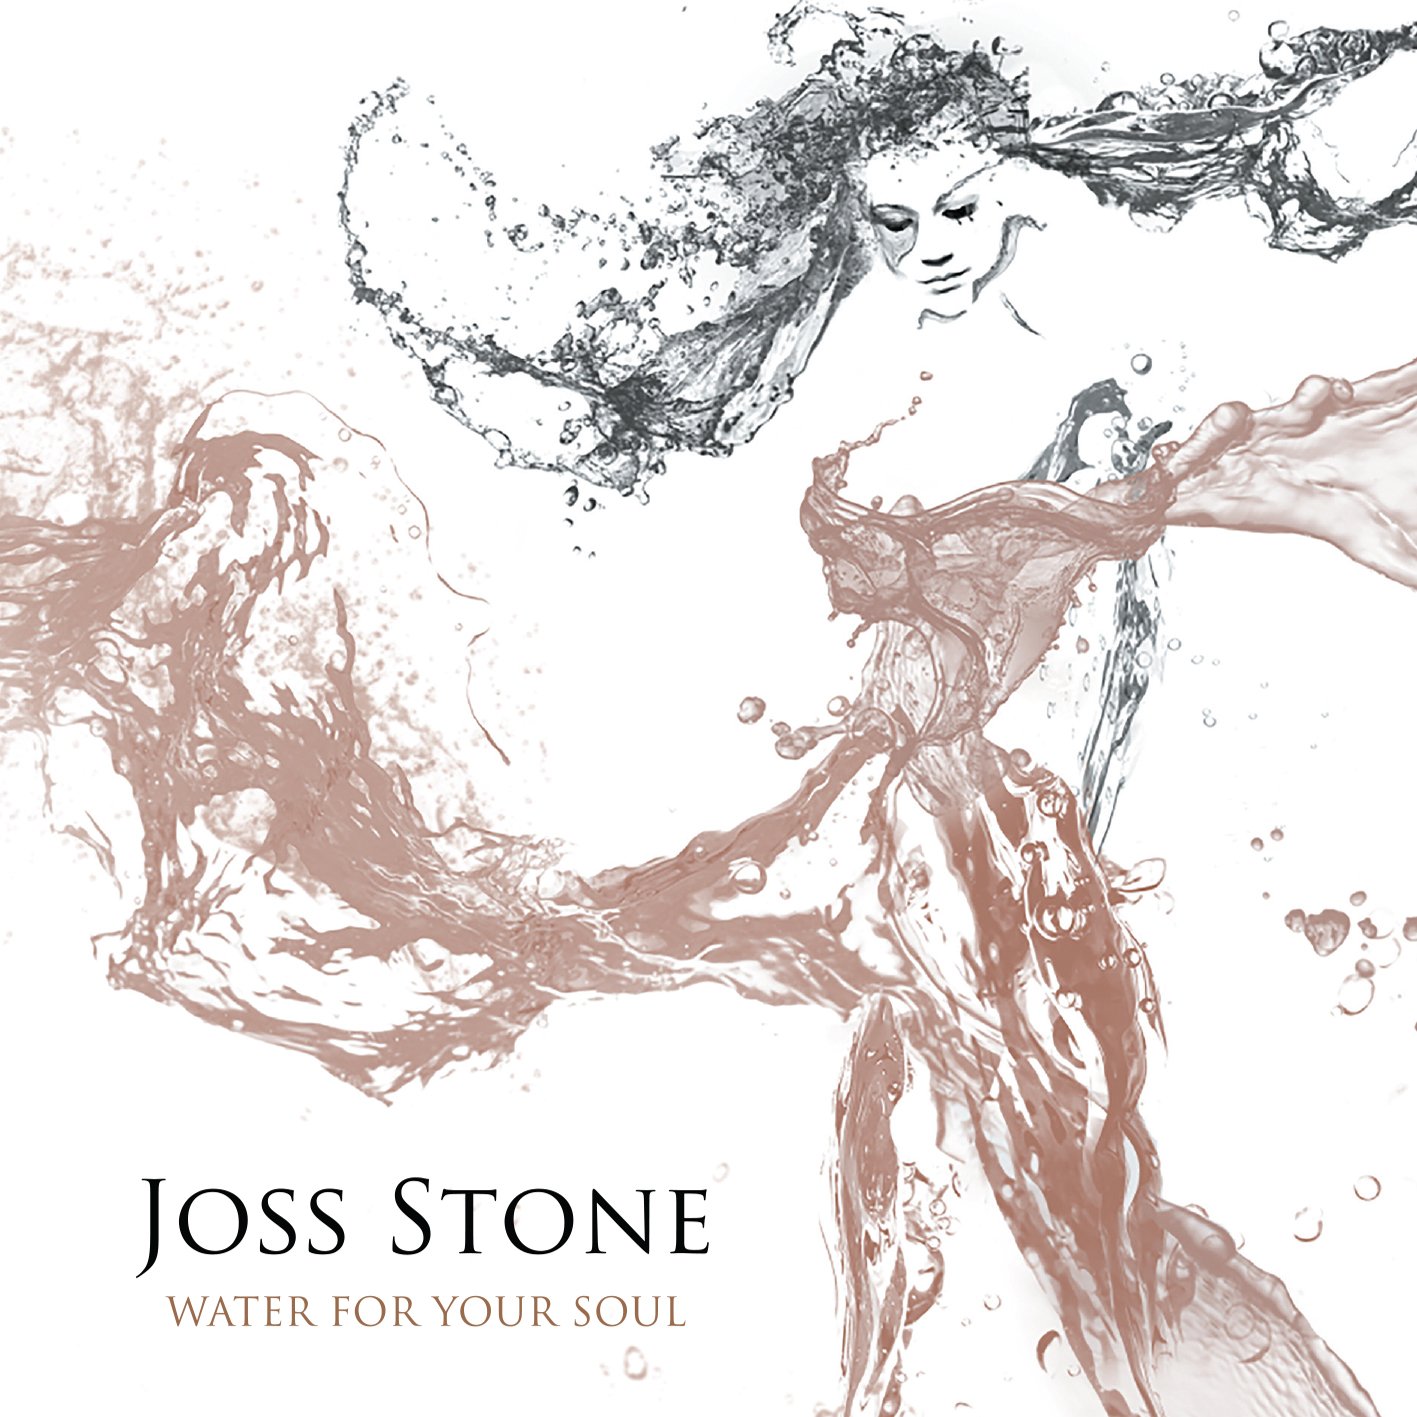 Joss Stone - Water For Your Soul (2015) [FLAC 24bit/88,2kHz]